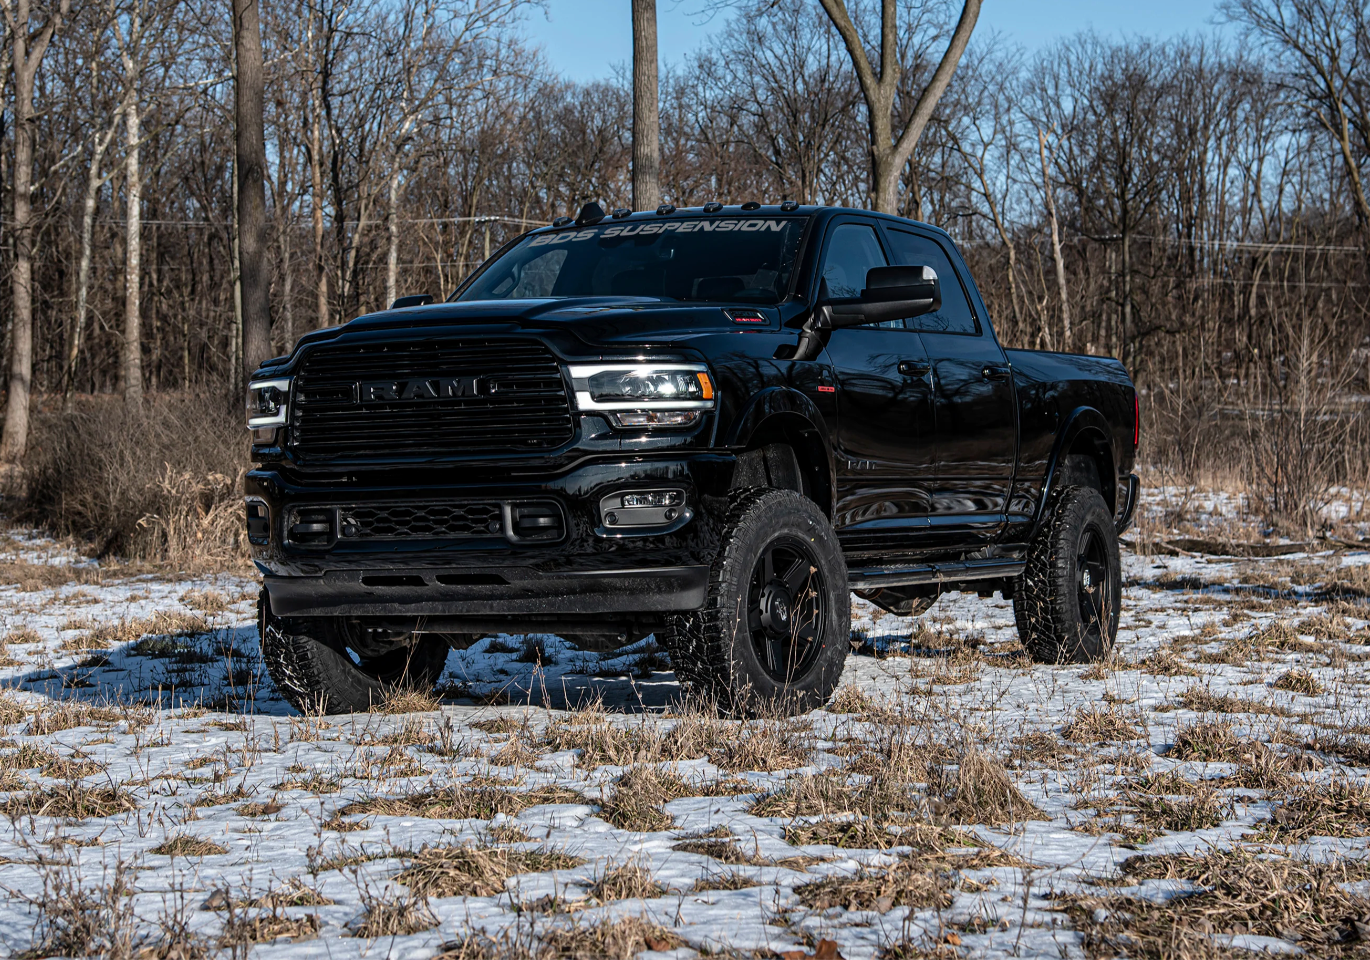 BDS 3" Lift Kit for 2019+ Ram 3500 - Outback Kitters